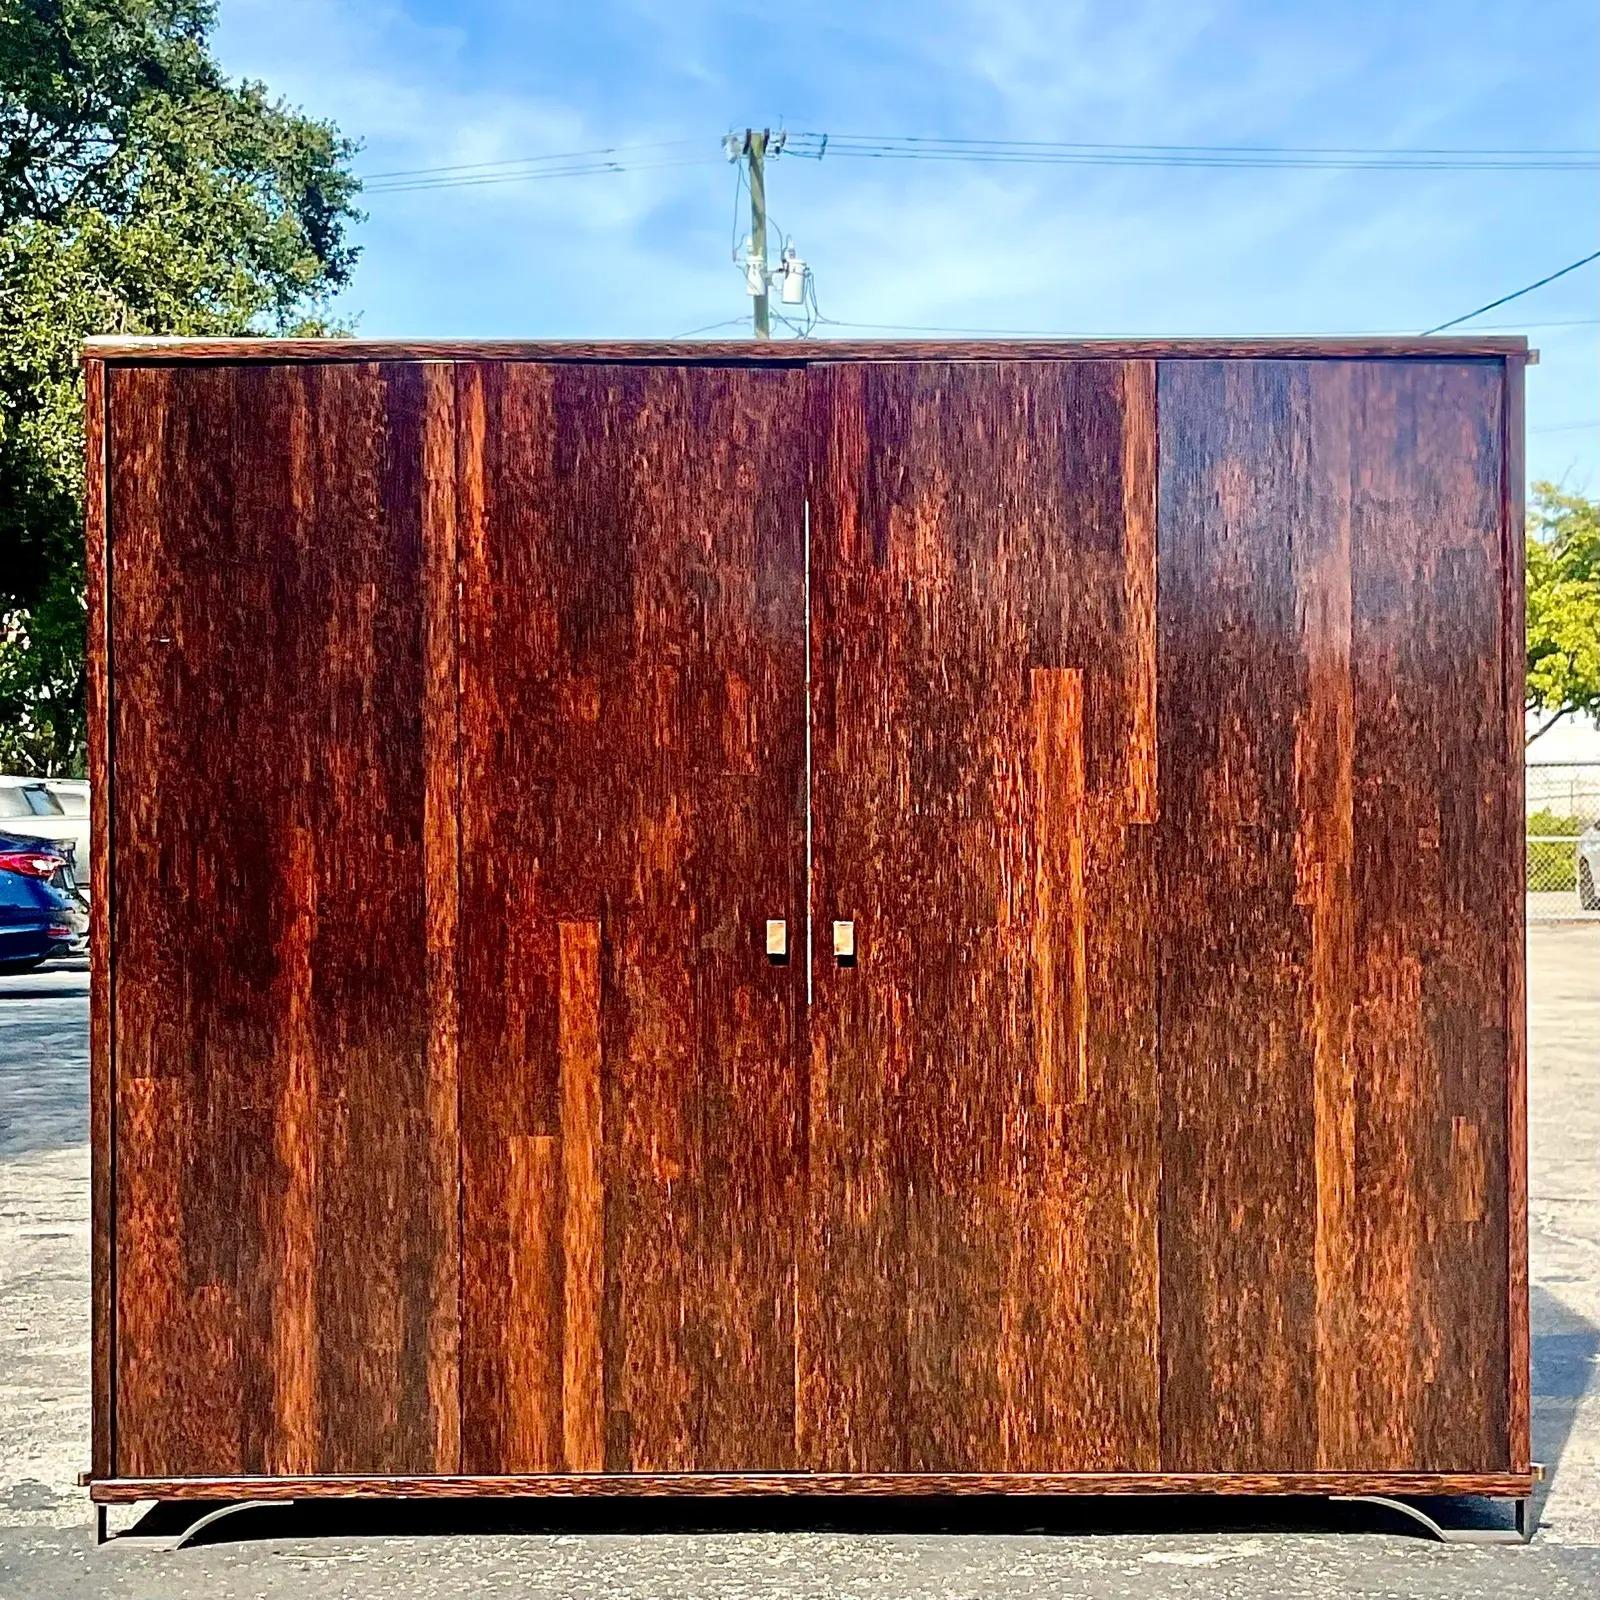 An exceptional vintage contemporary wall cabinet. Made by the legendary Peter Marino for a private Palm Beach client. Chic Rosewood cabinet with custom bronze hardware. Interior light ash shelving currently outfitted for a TV. Soft touch drawers and